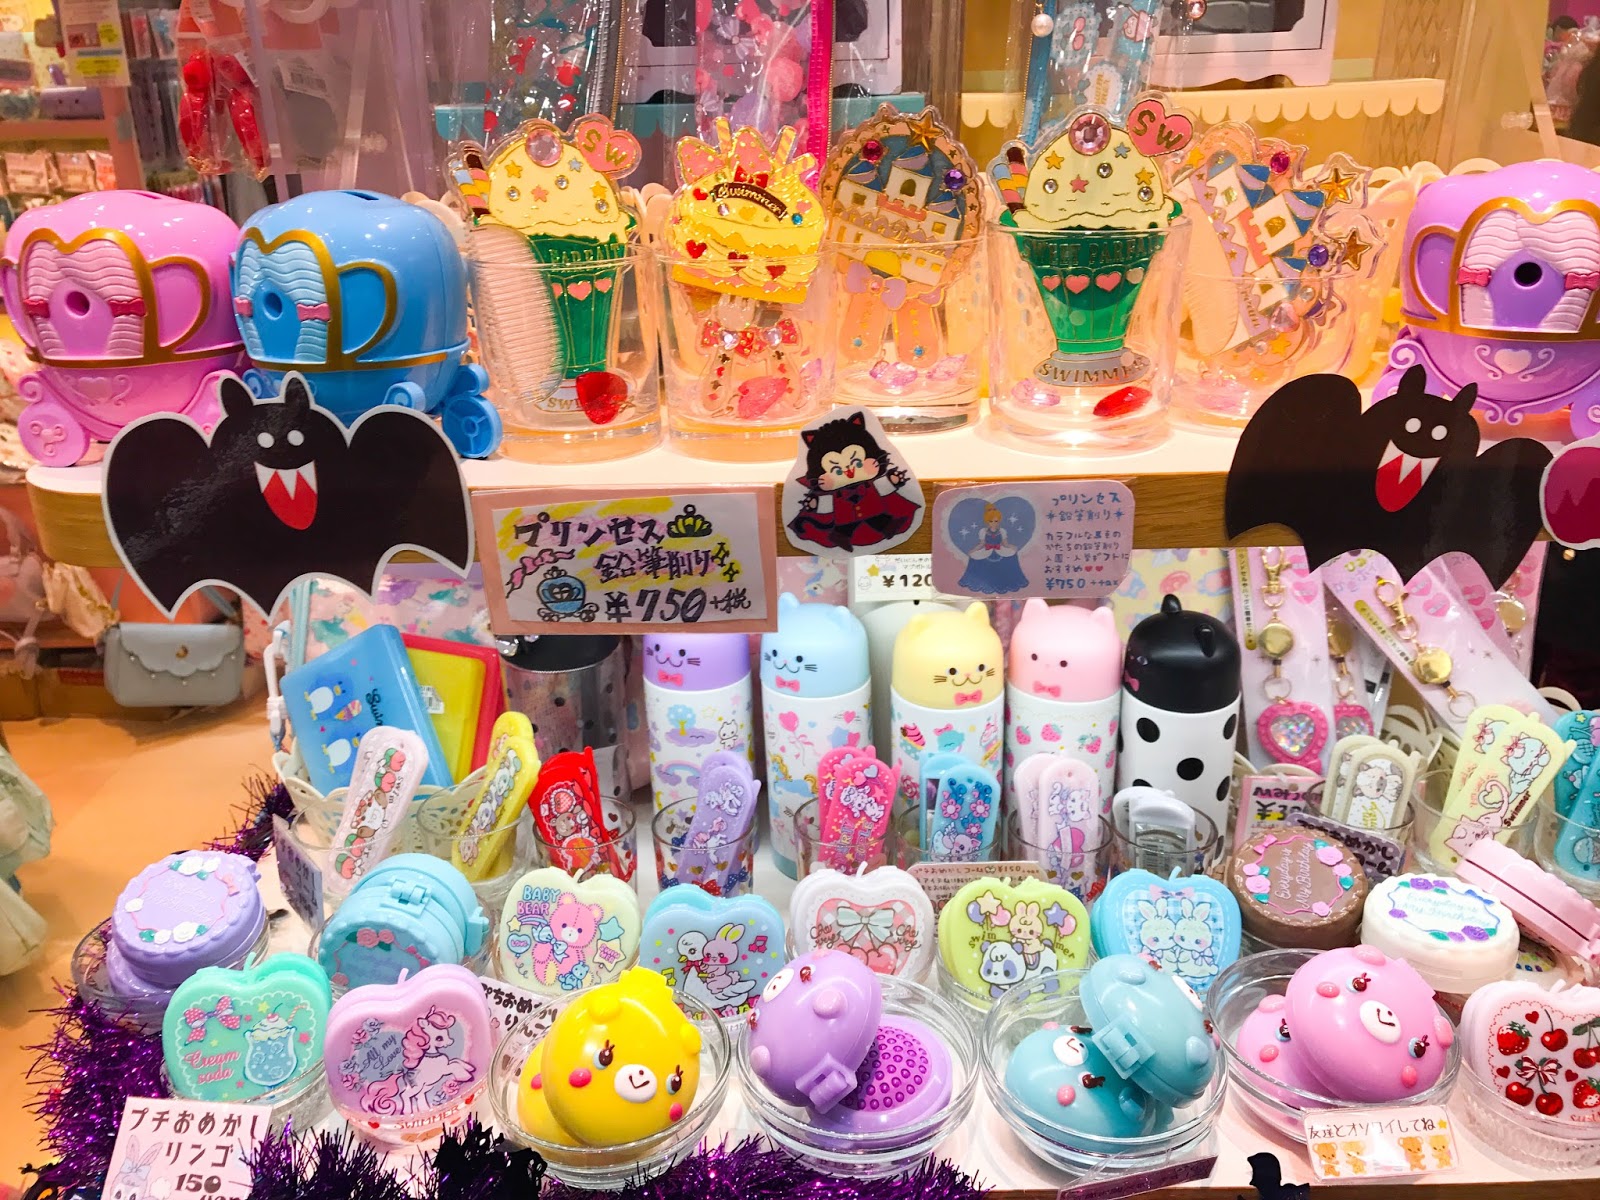 What to see on your trip to Harajuku Japan